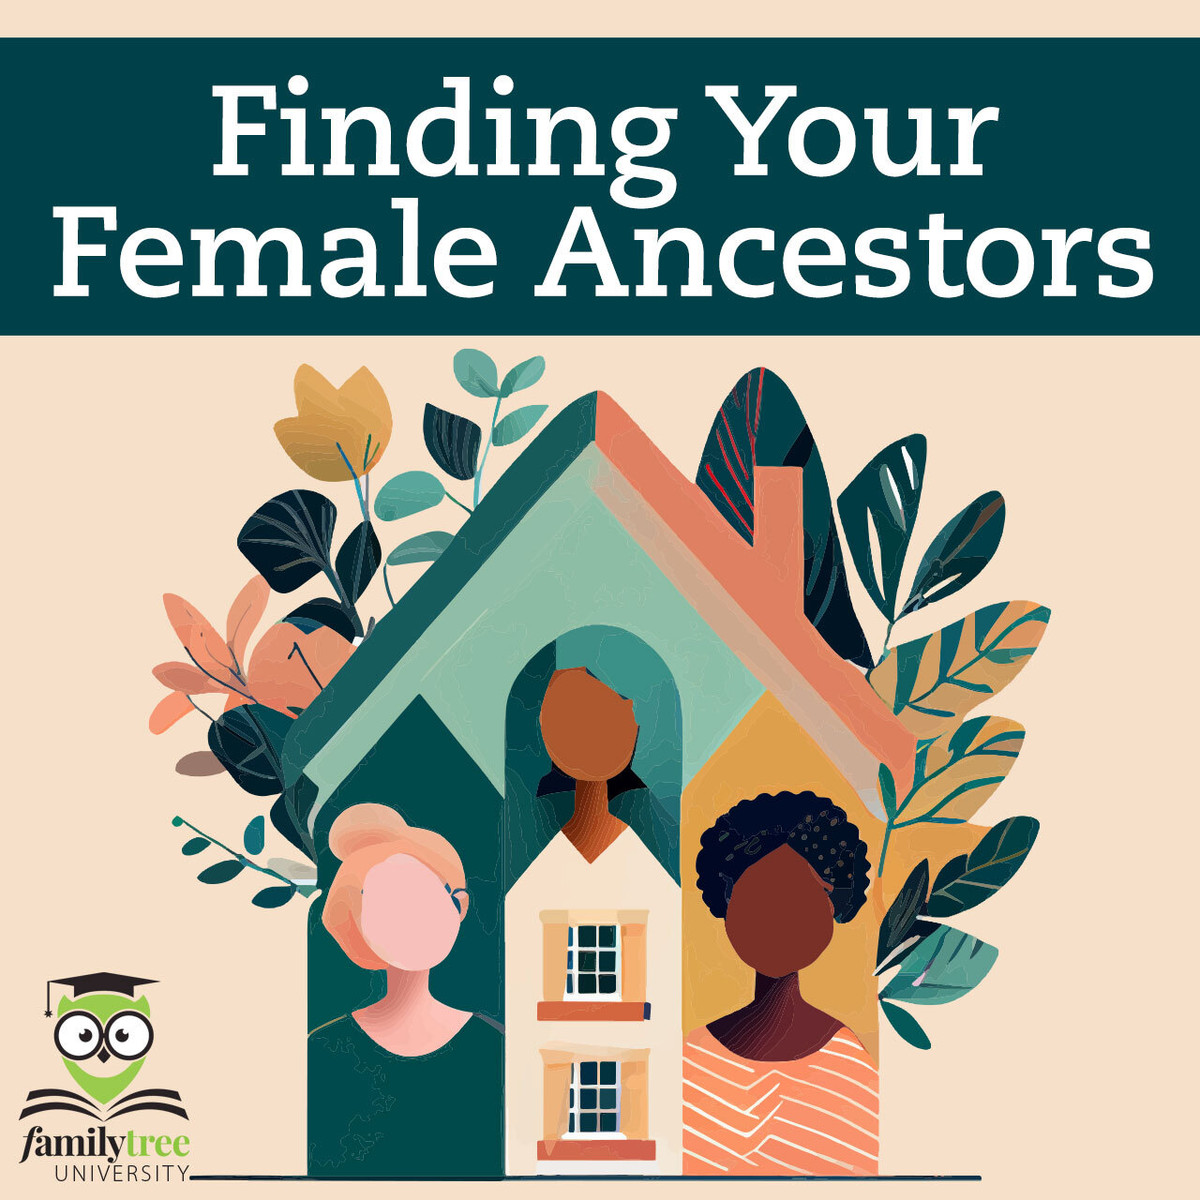 Finding Your Female Ancestors